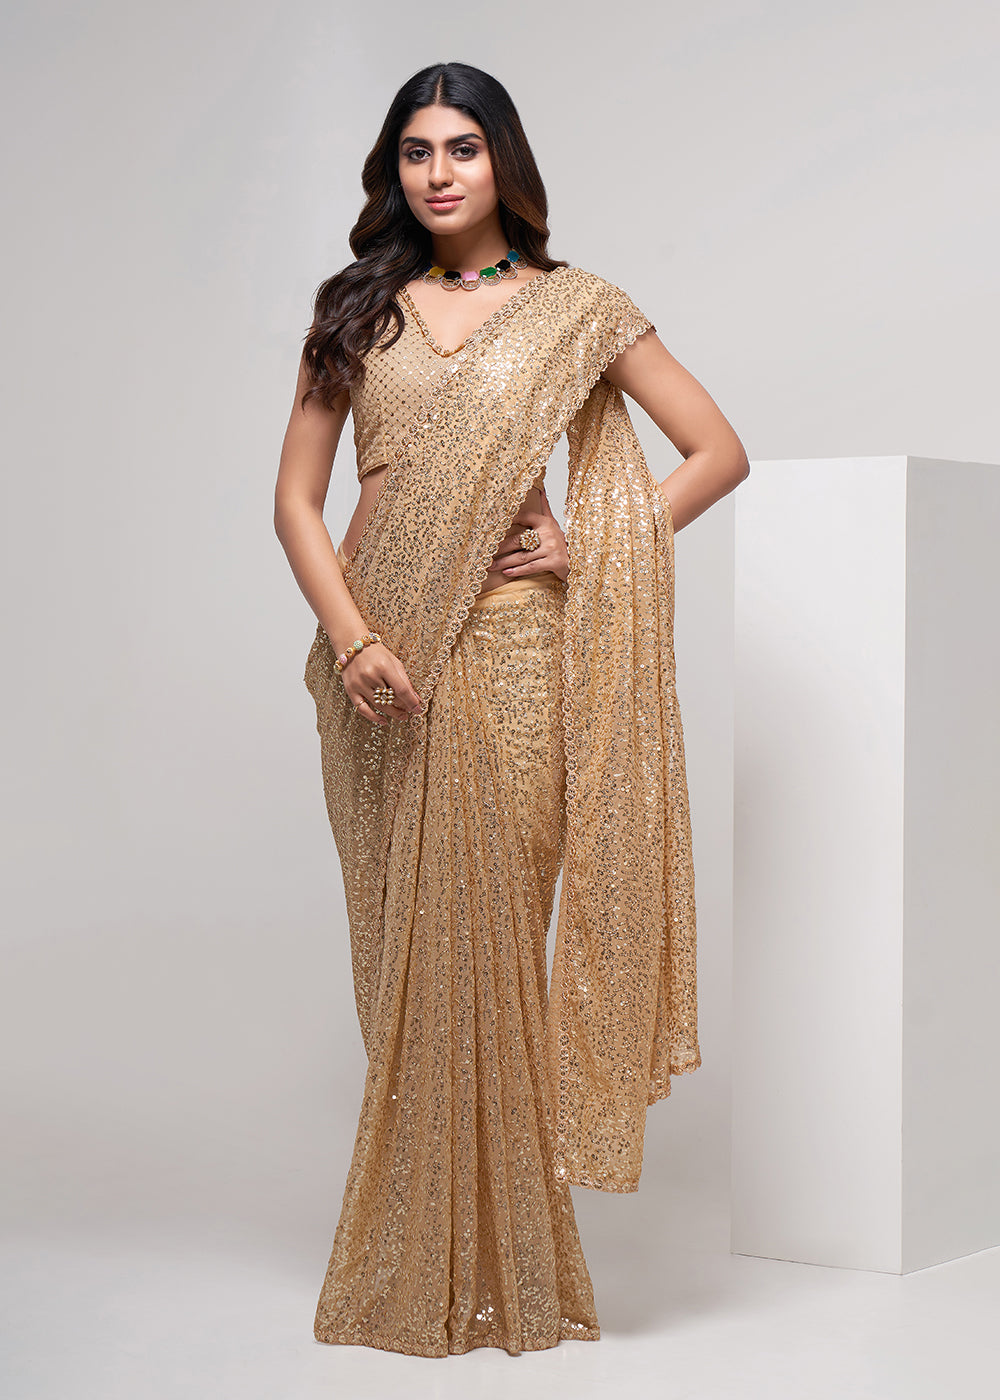 Buy Now Gold Beige Thread & Multi Sequins Work Party Wear Saree Online in USA, UK, Canada & Worldwide at Empress Clothing.